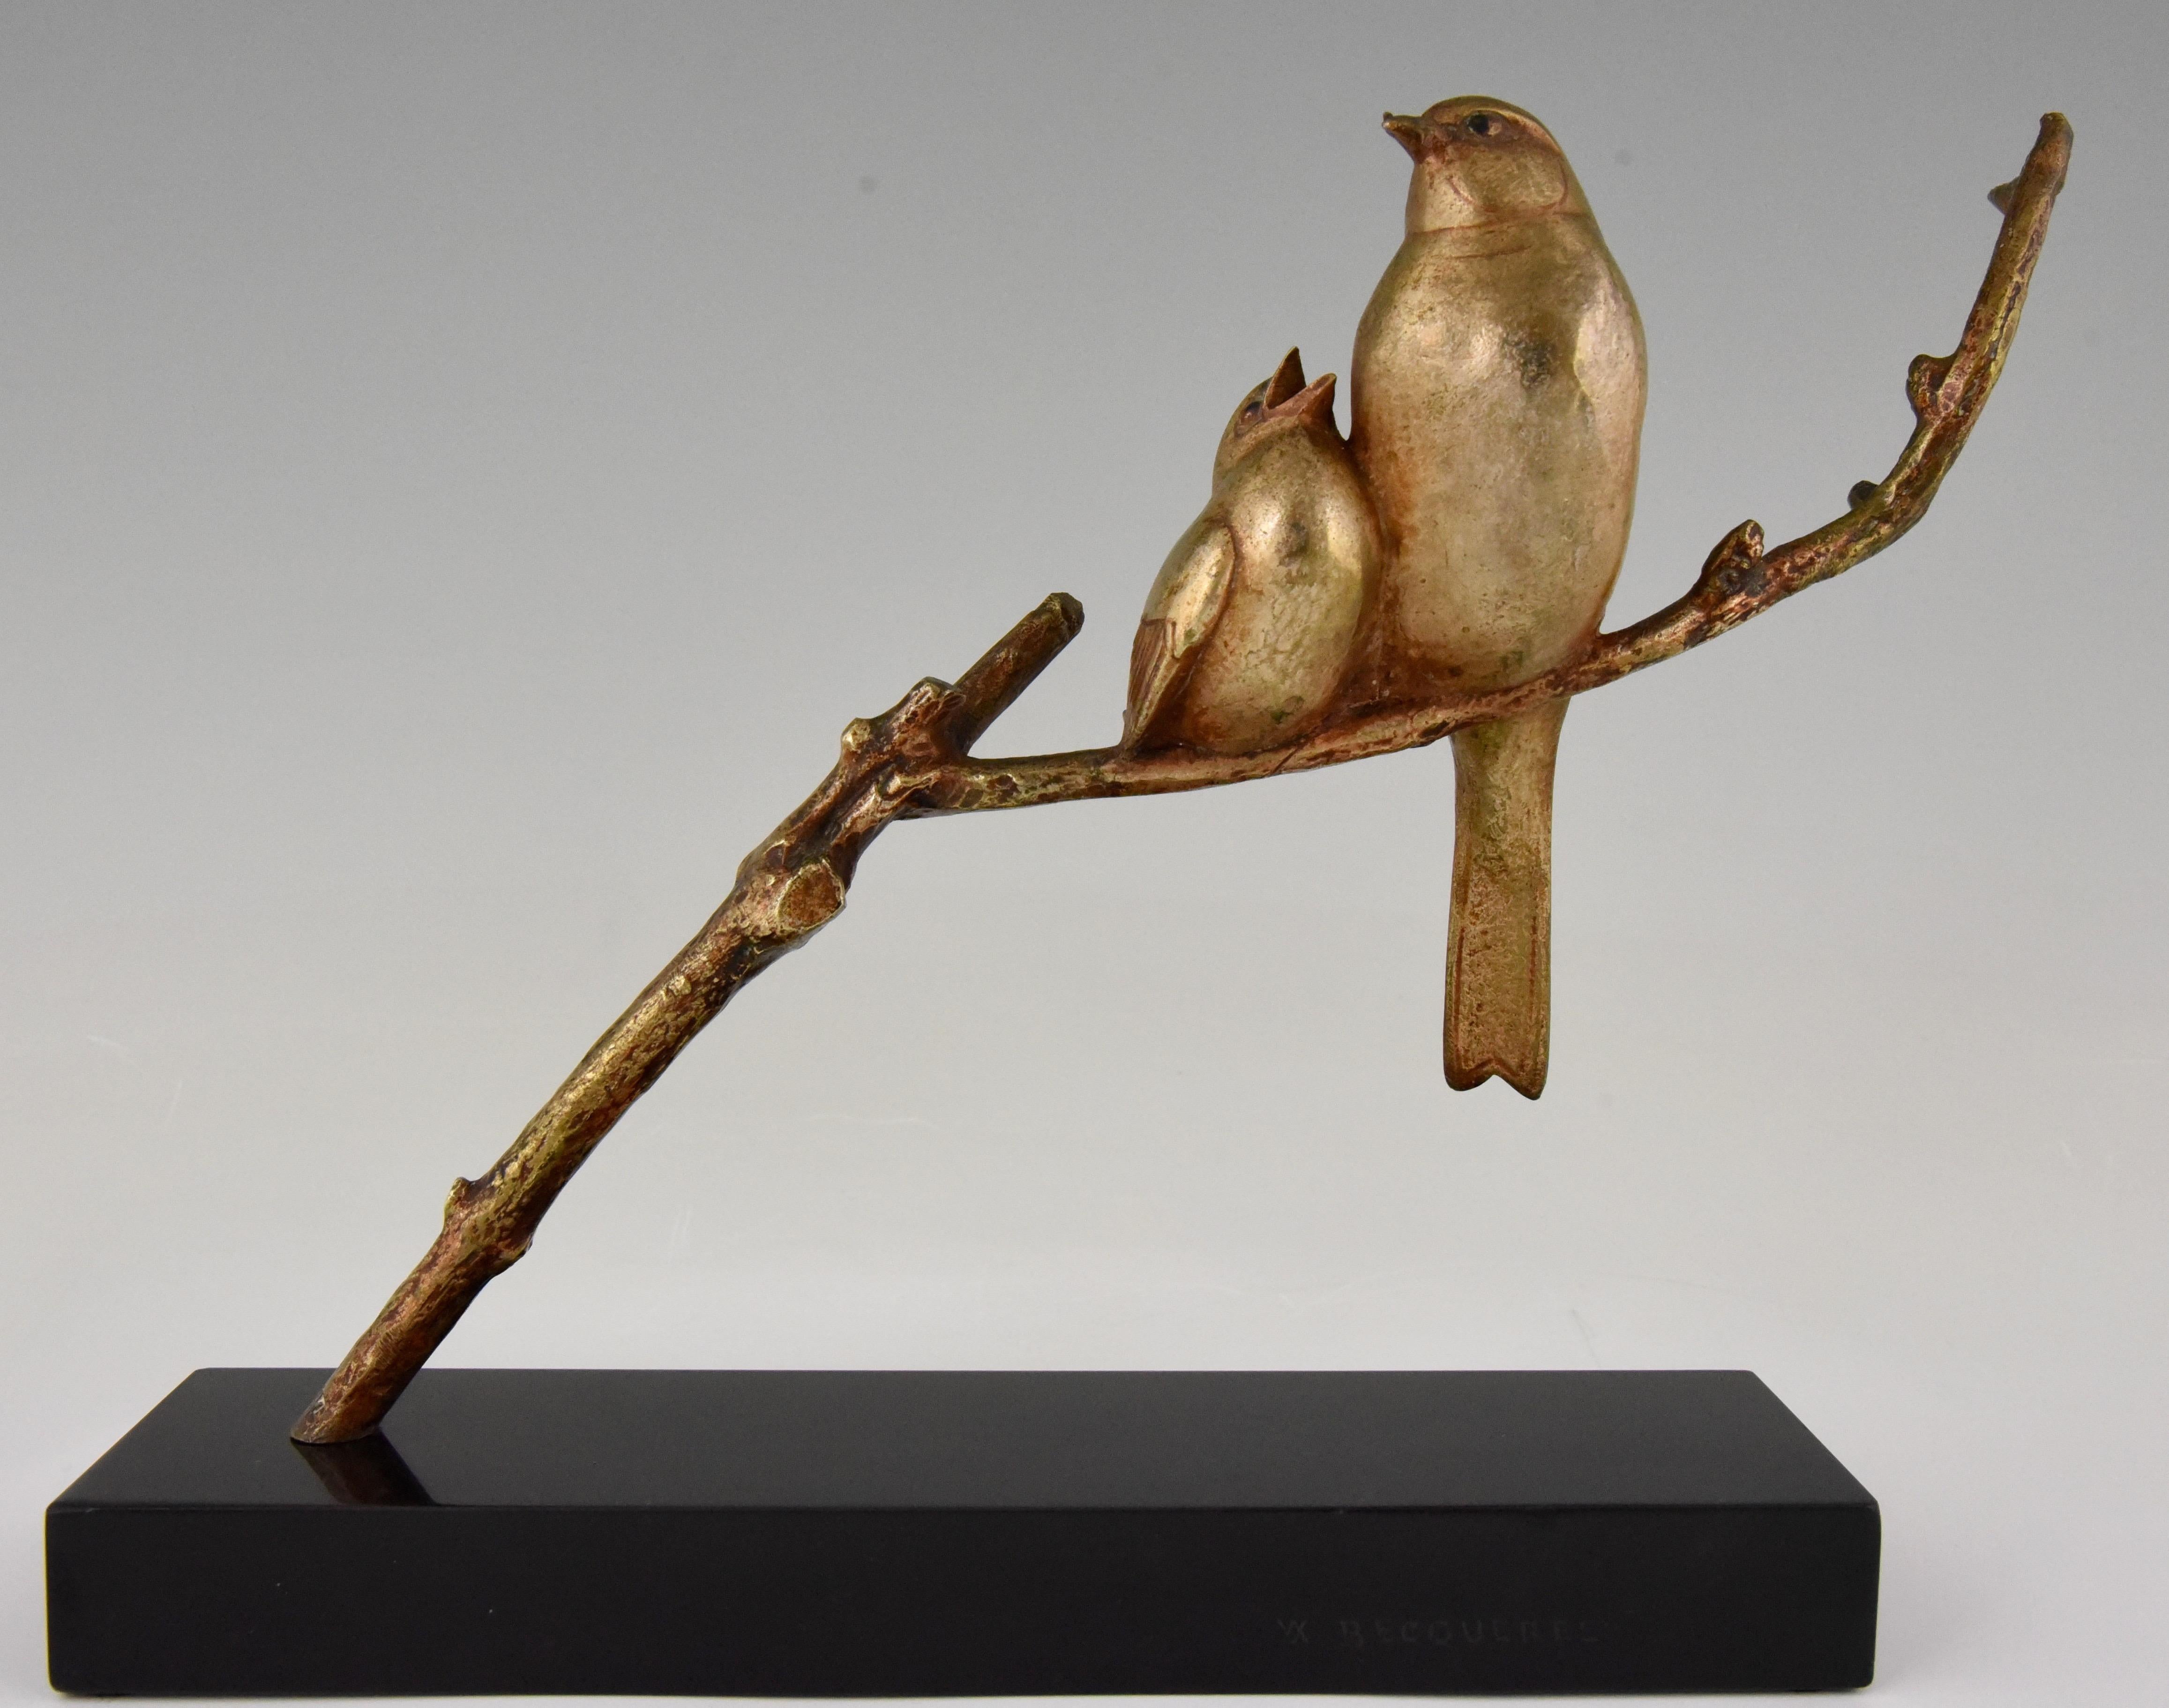 Very cute Art Deco bronze sculpture of a mother bird feeding her young.
Both birds are sitting on a branch. The bronze has a lovely original patina and stands on a Belgian Black marble plinth. Signed by the famous artist Andre Vincent Becquerel,